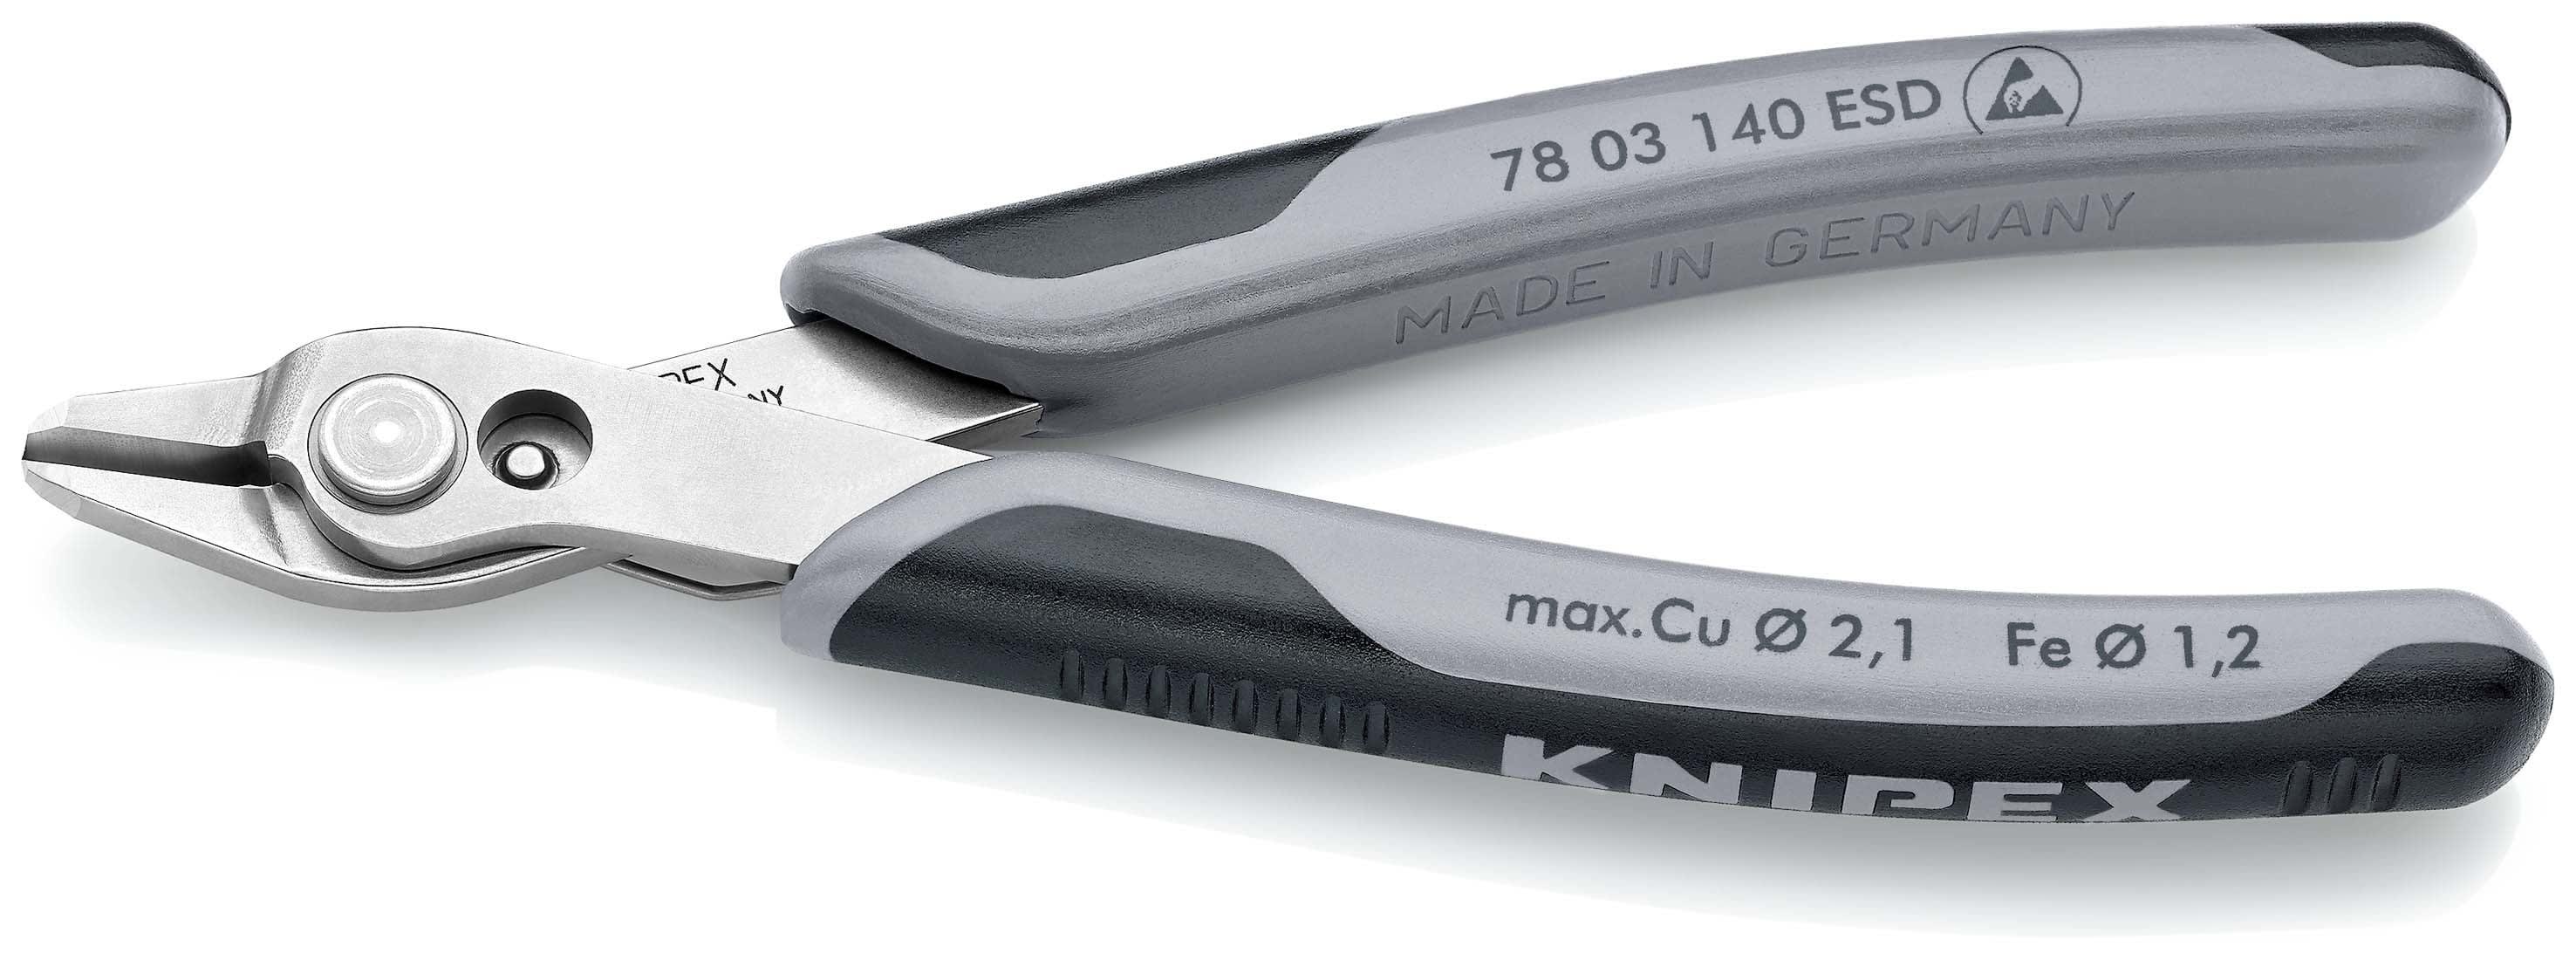 KNIPEX - Pince coupante electronique Super Knips XL 140mm - Gainage bi-matiere ESD